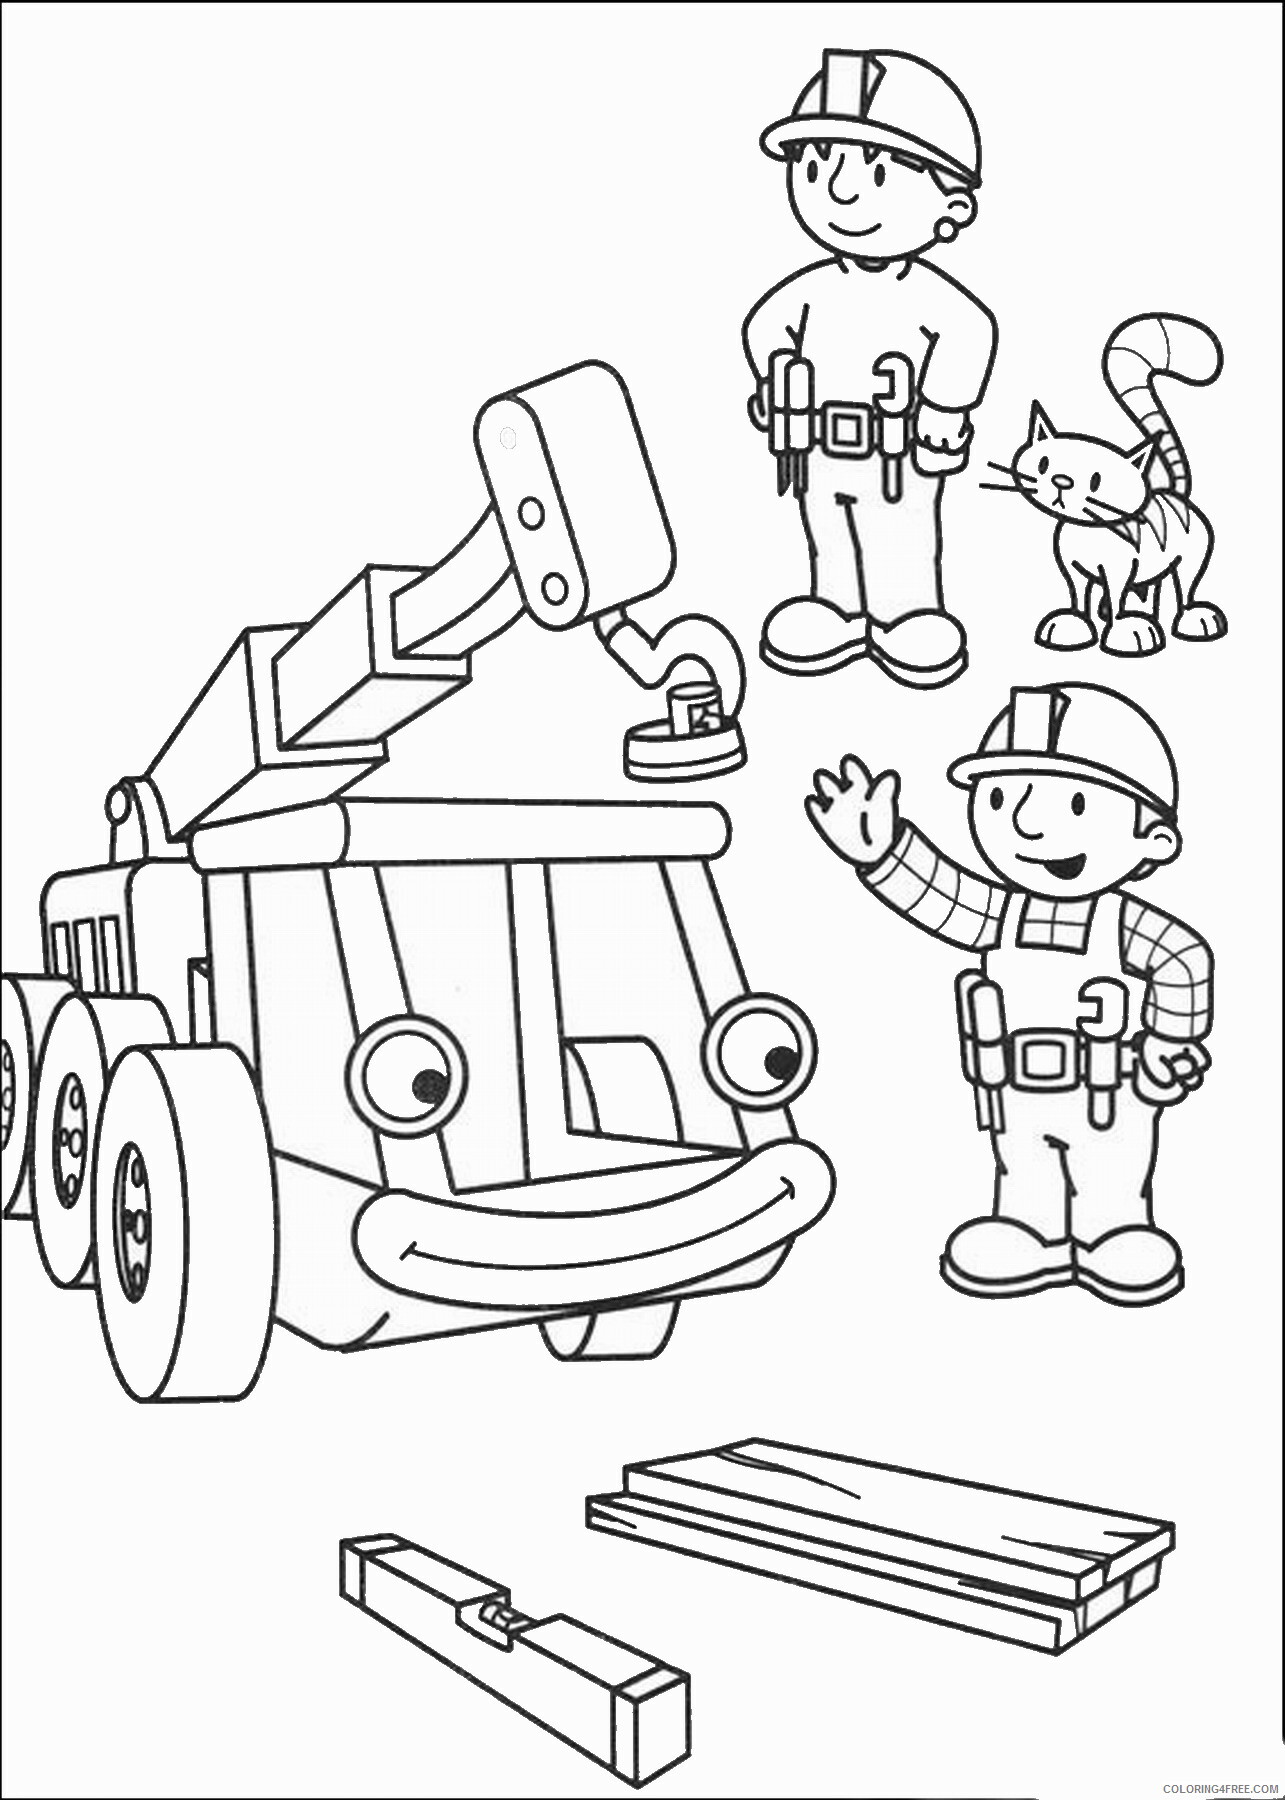 Bob the Builder Coloring Pages TV Film bob the builder_07 Printable 2020 00957 Coloring4free